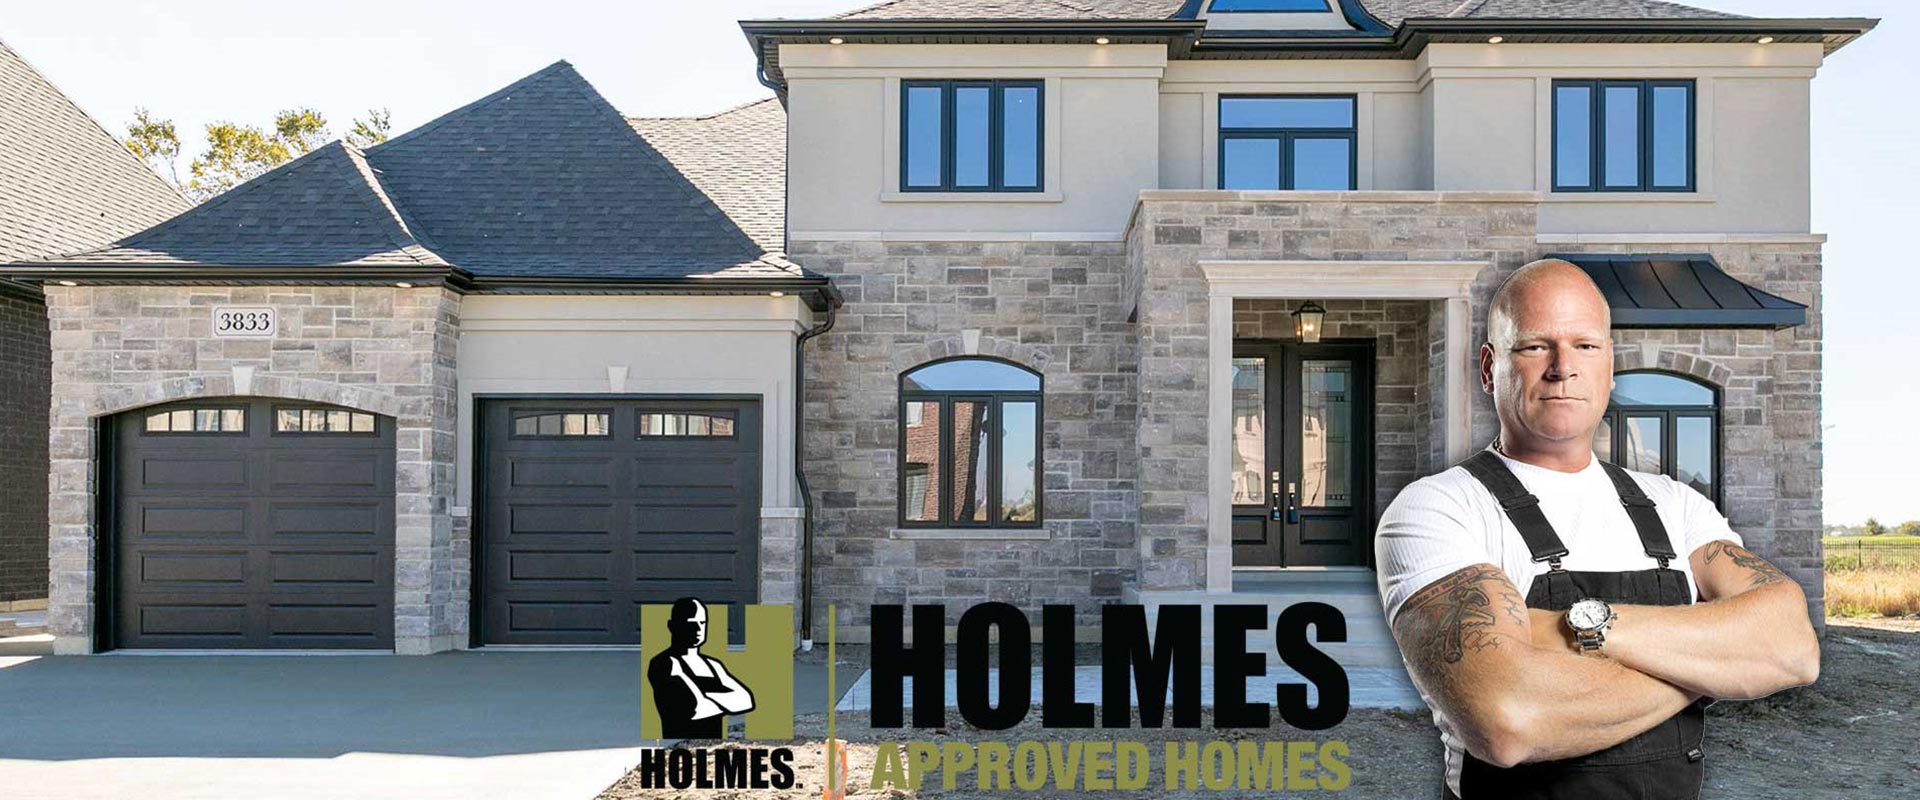 Mike Holmes Approved Banner